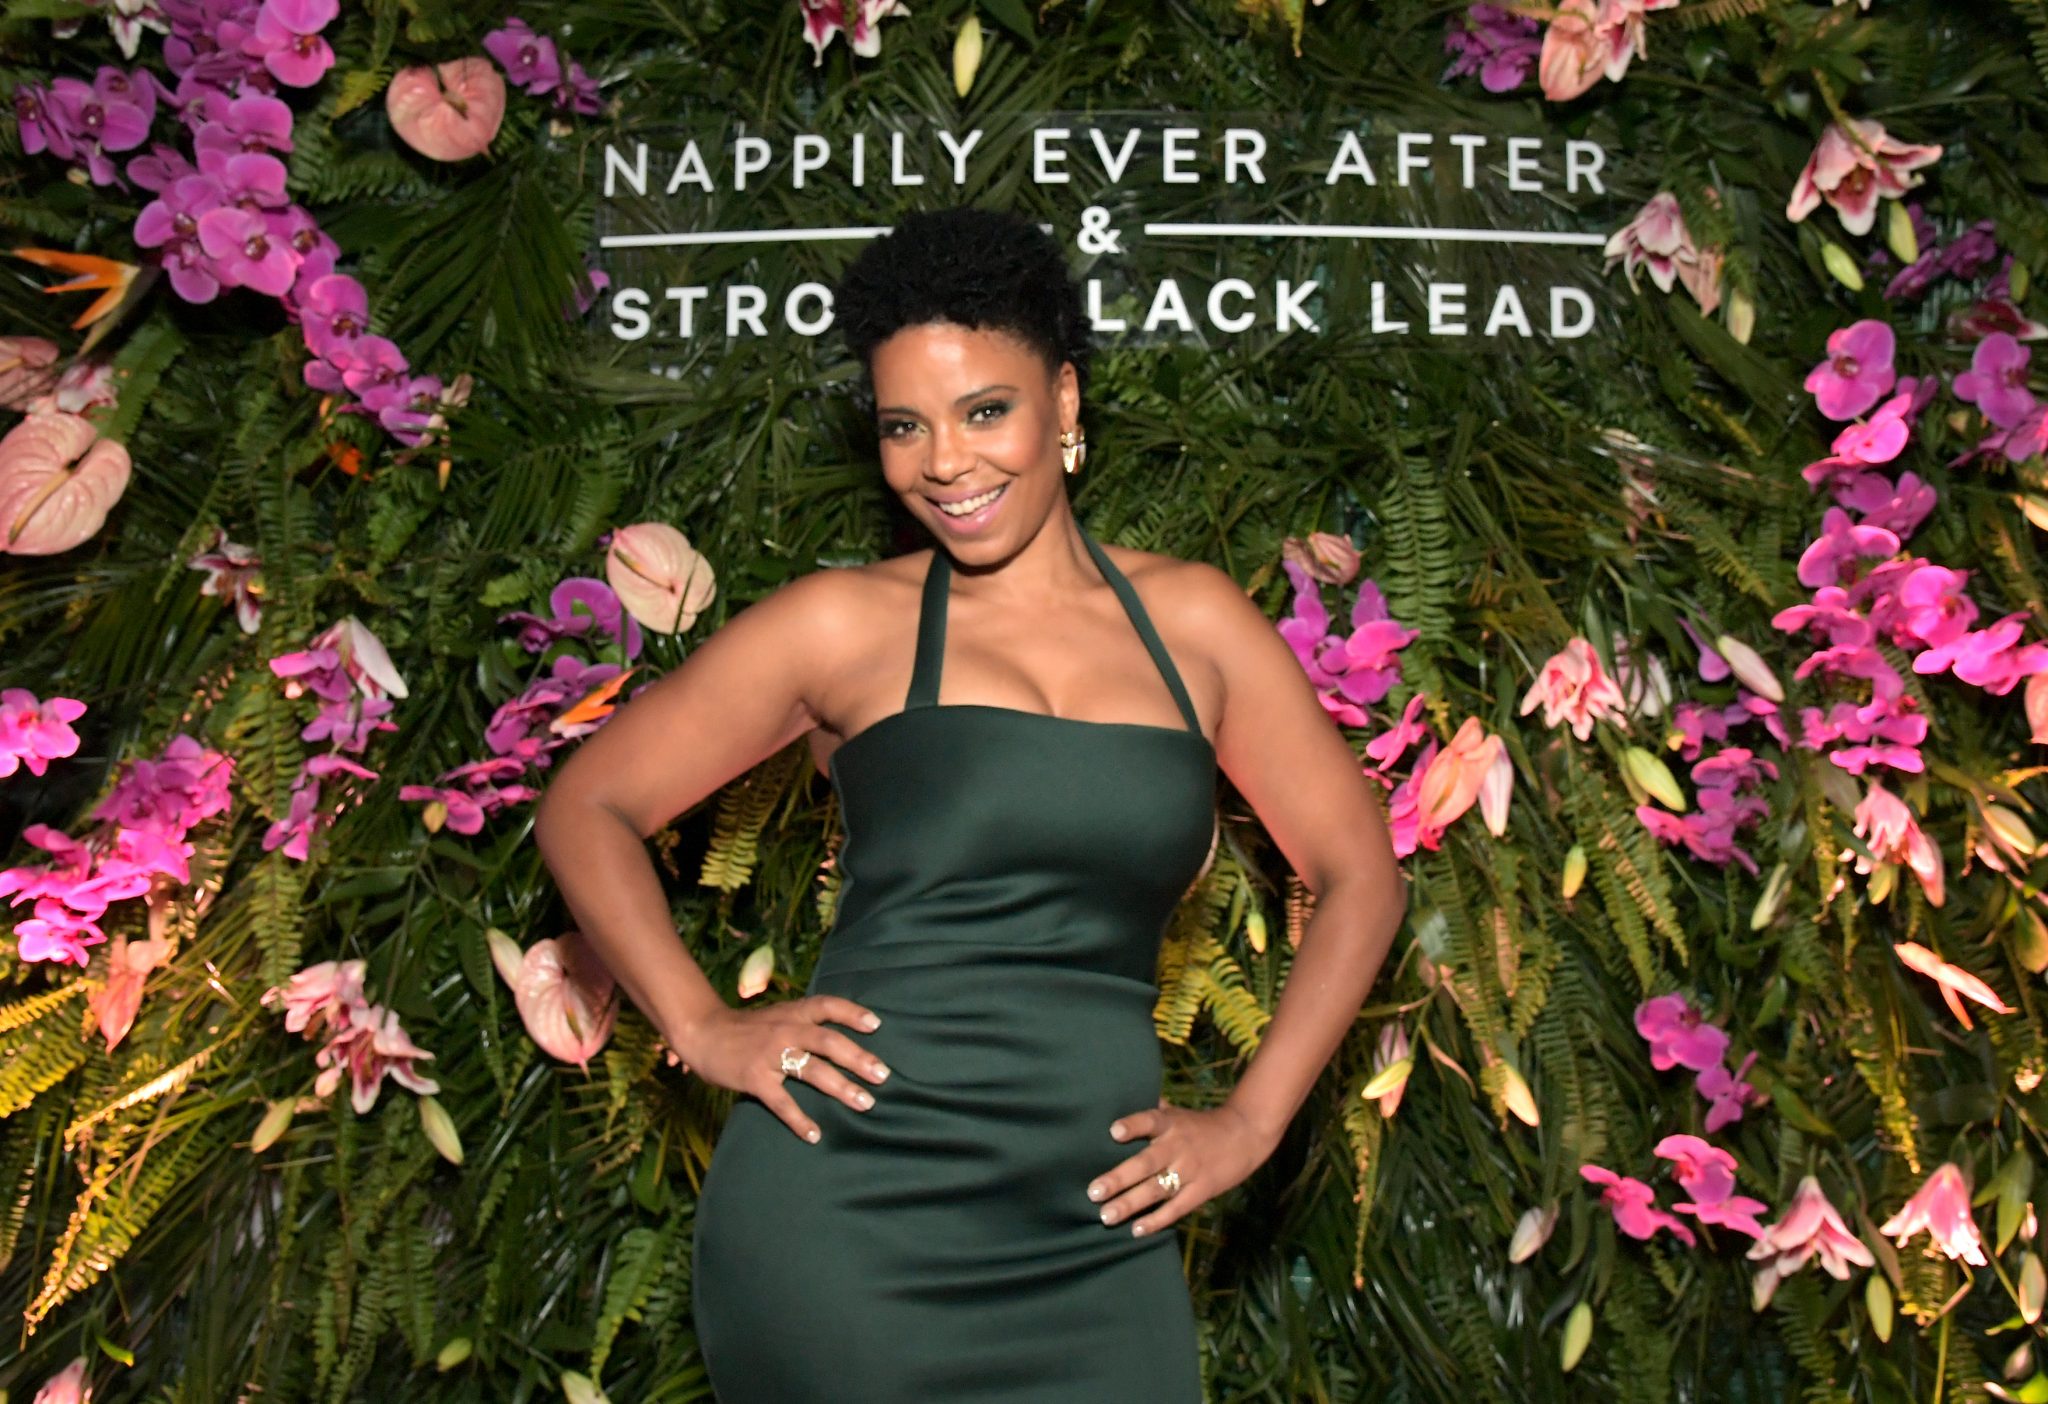 Netflix’s “Nappily Ever After” Special Screening With Sanaa Lathan